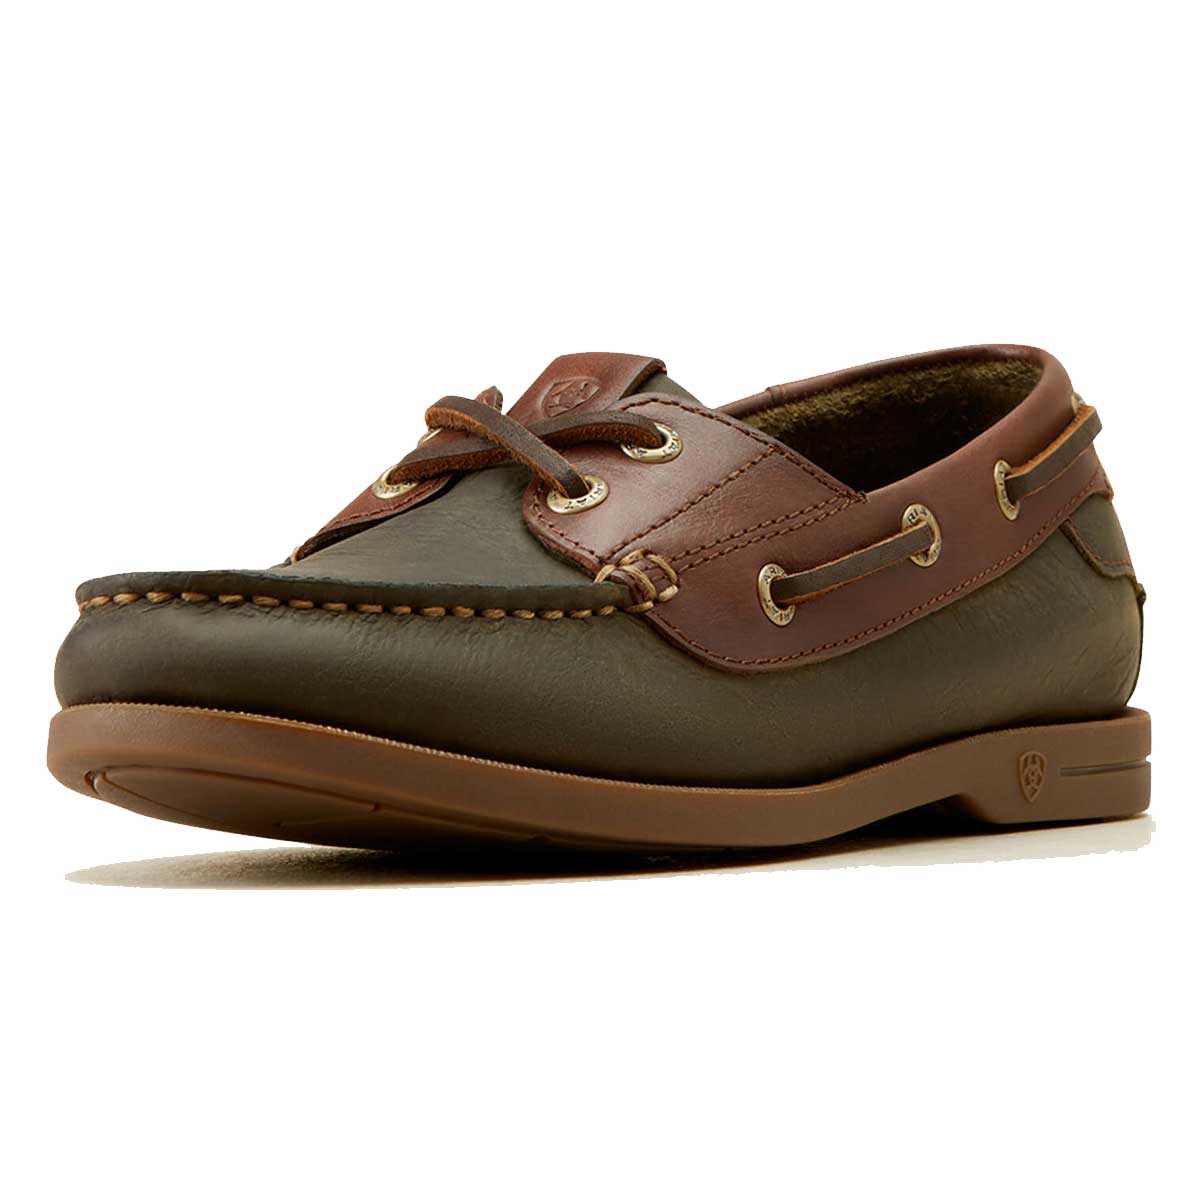 ARIAT Antigua Deck Shoes - Womens - Olive Night